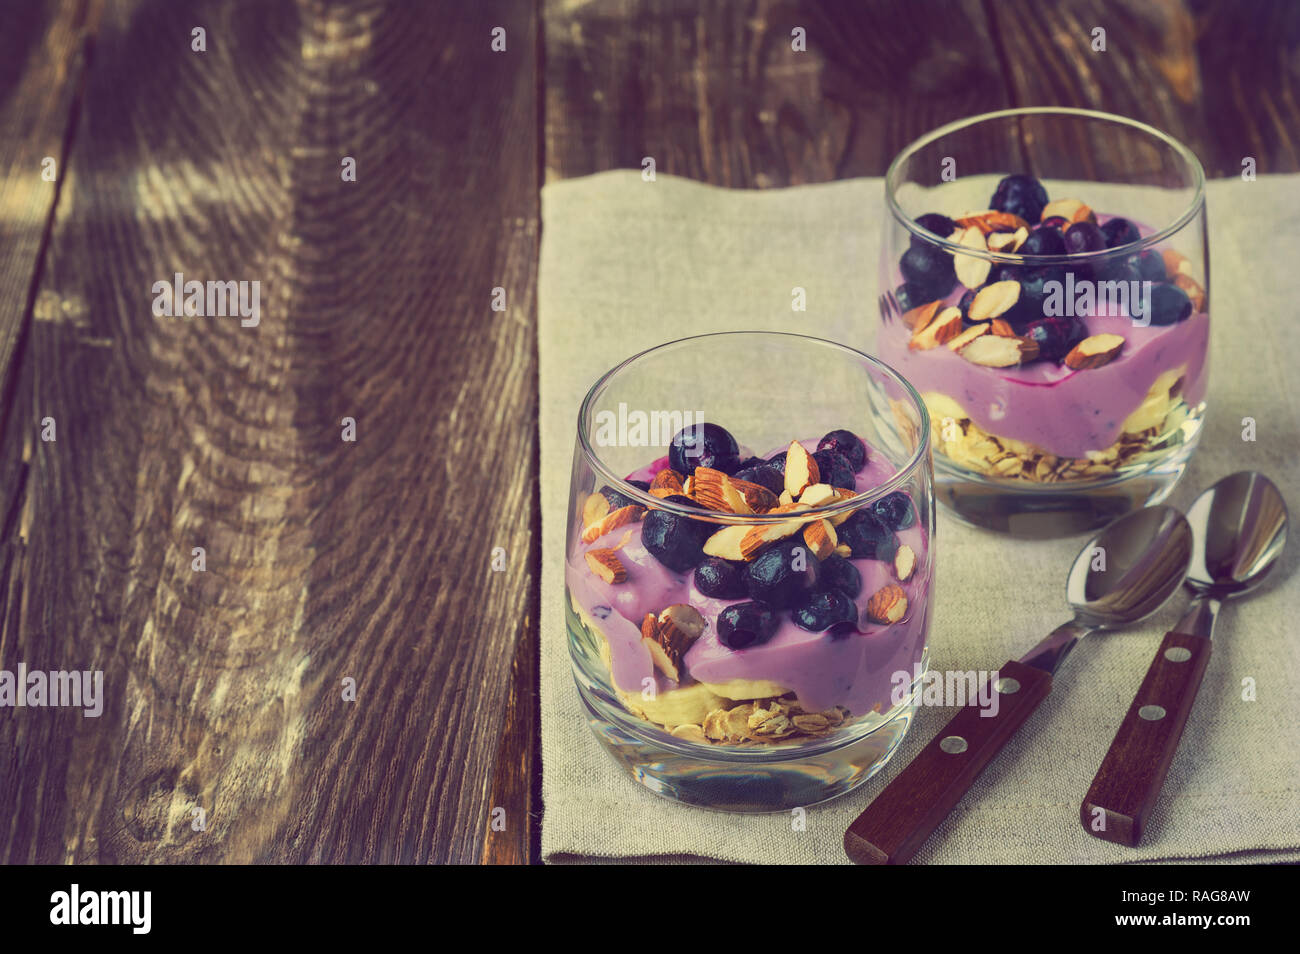 Dessert of oatmeal, banana, yogurt, blueberries and almond in glass bowls on rustic wooden background. Vintage toned picture. Stock Photo